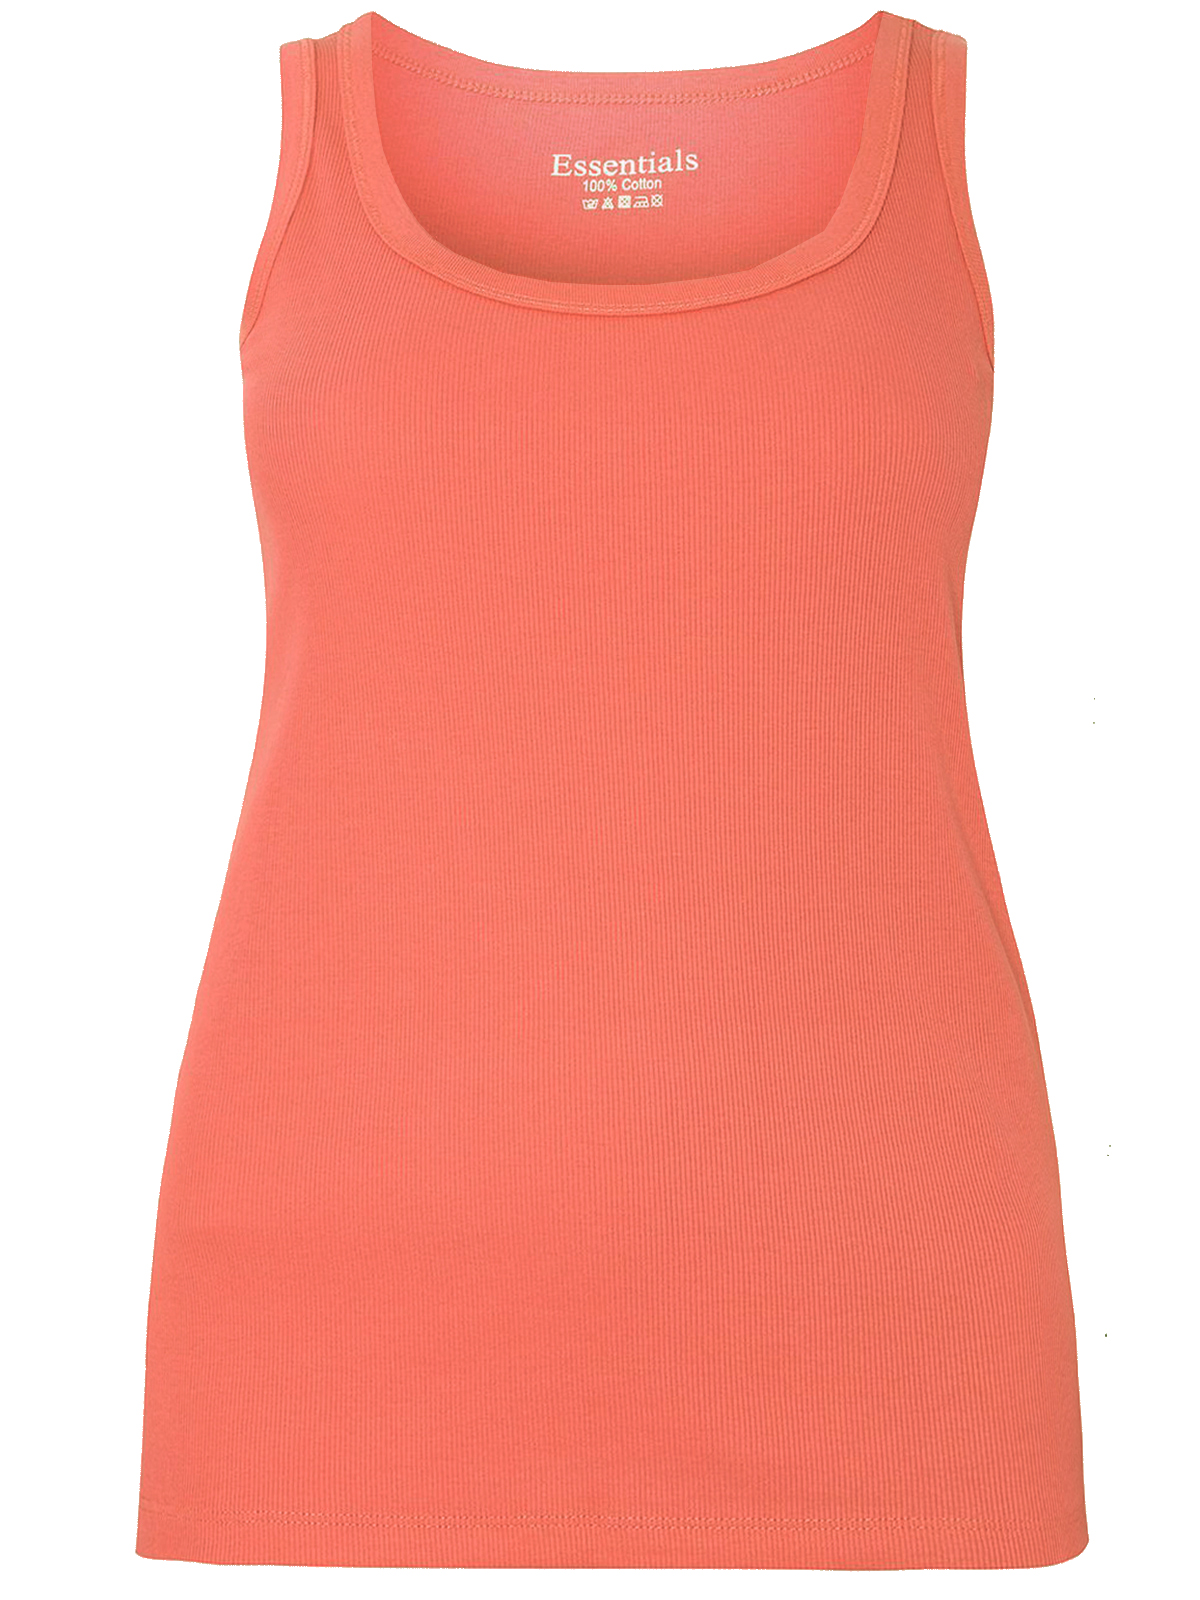 3vans CORAL Pure Cotton Ribbed Sleeveless Vest - Plus Size 22/24 to 26/28